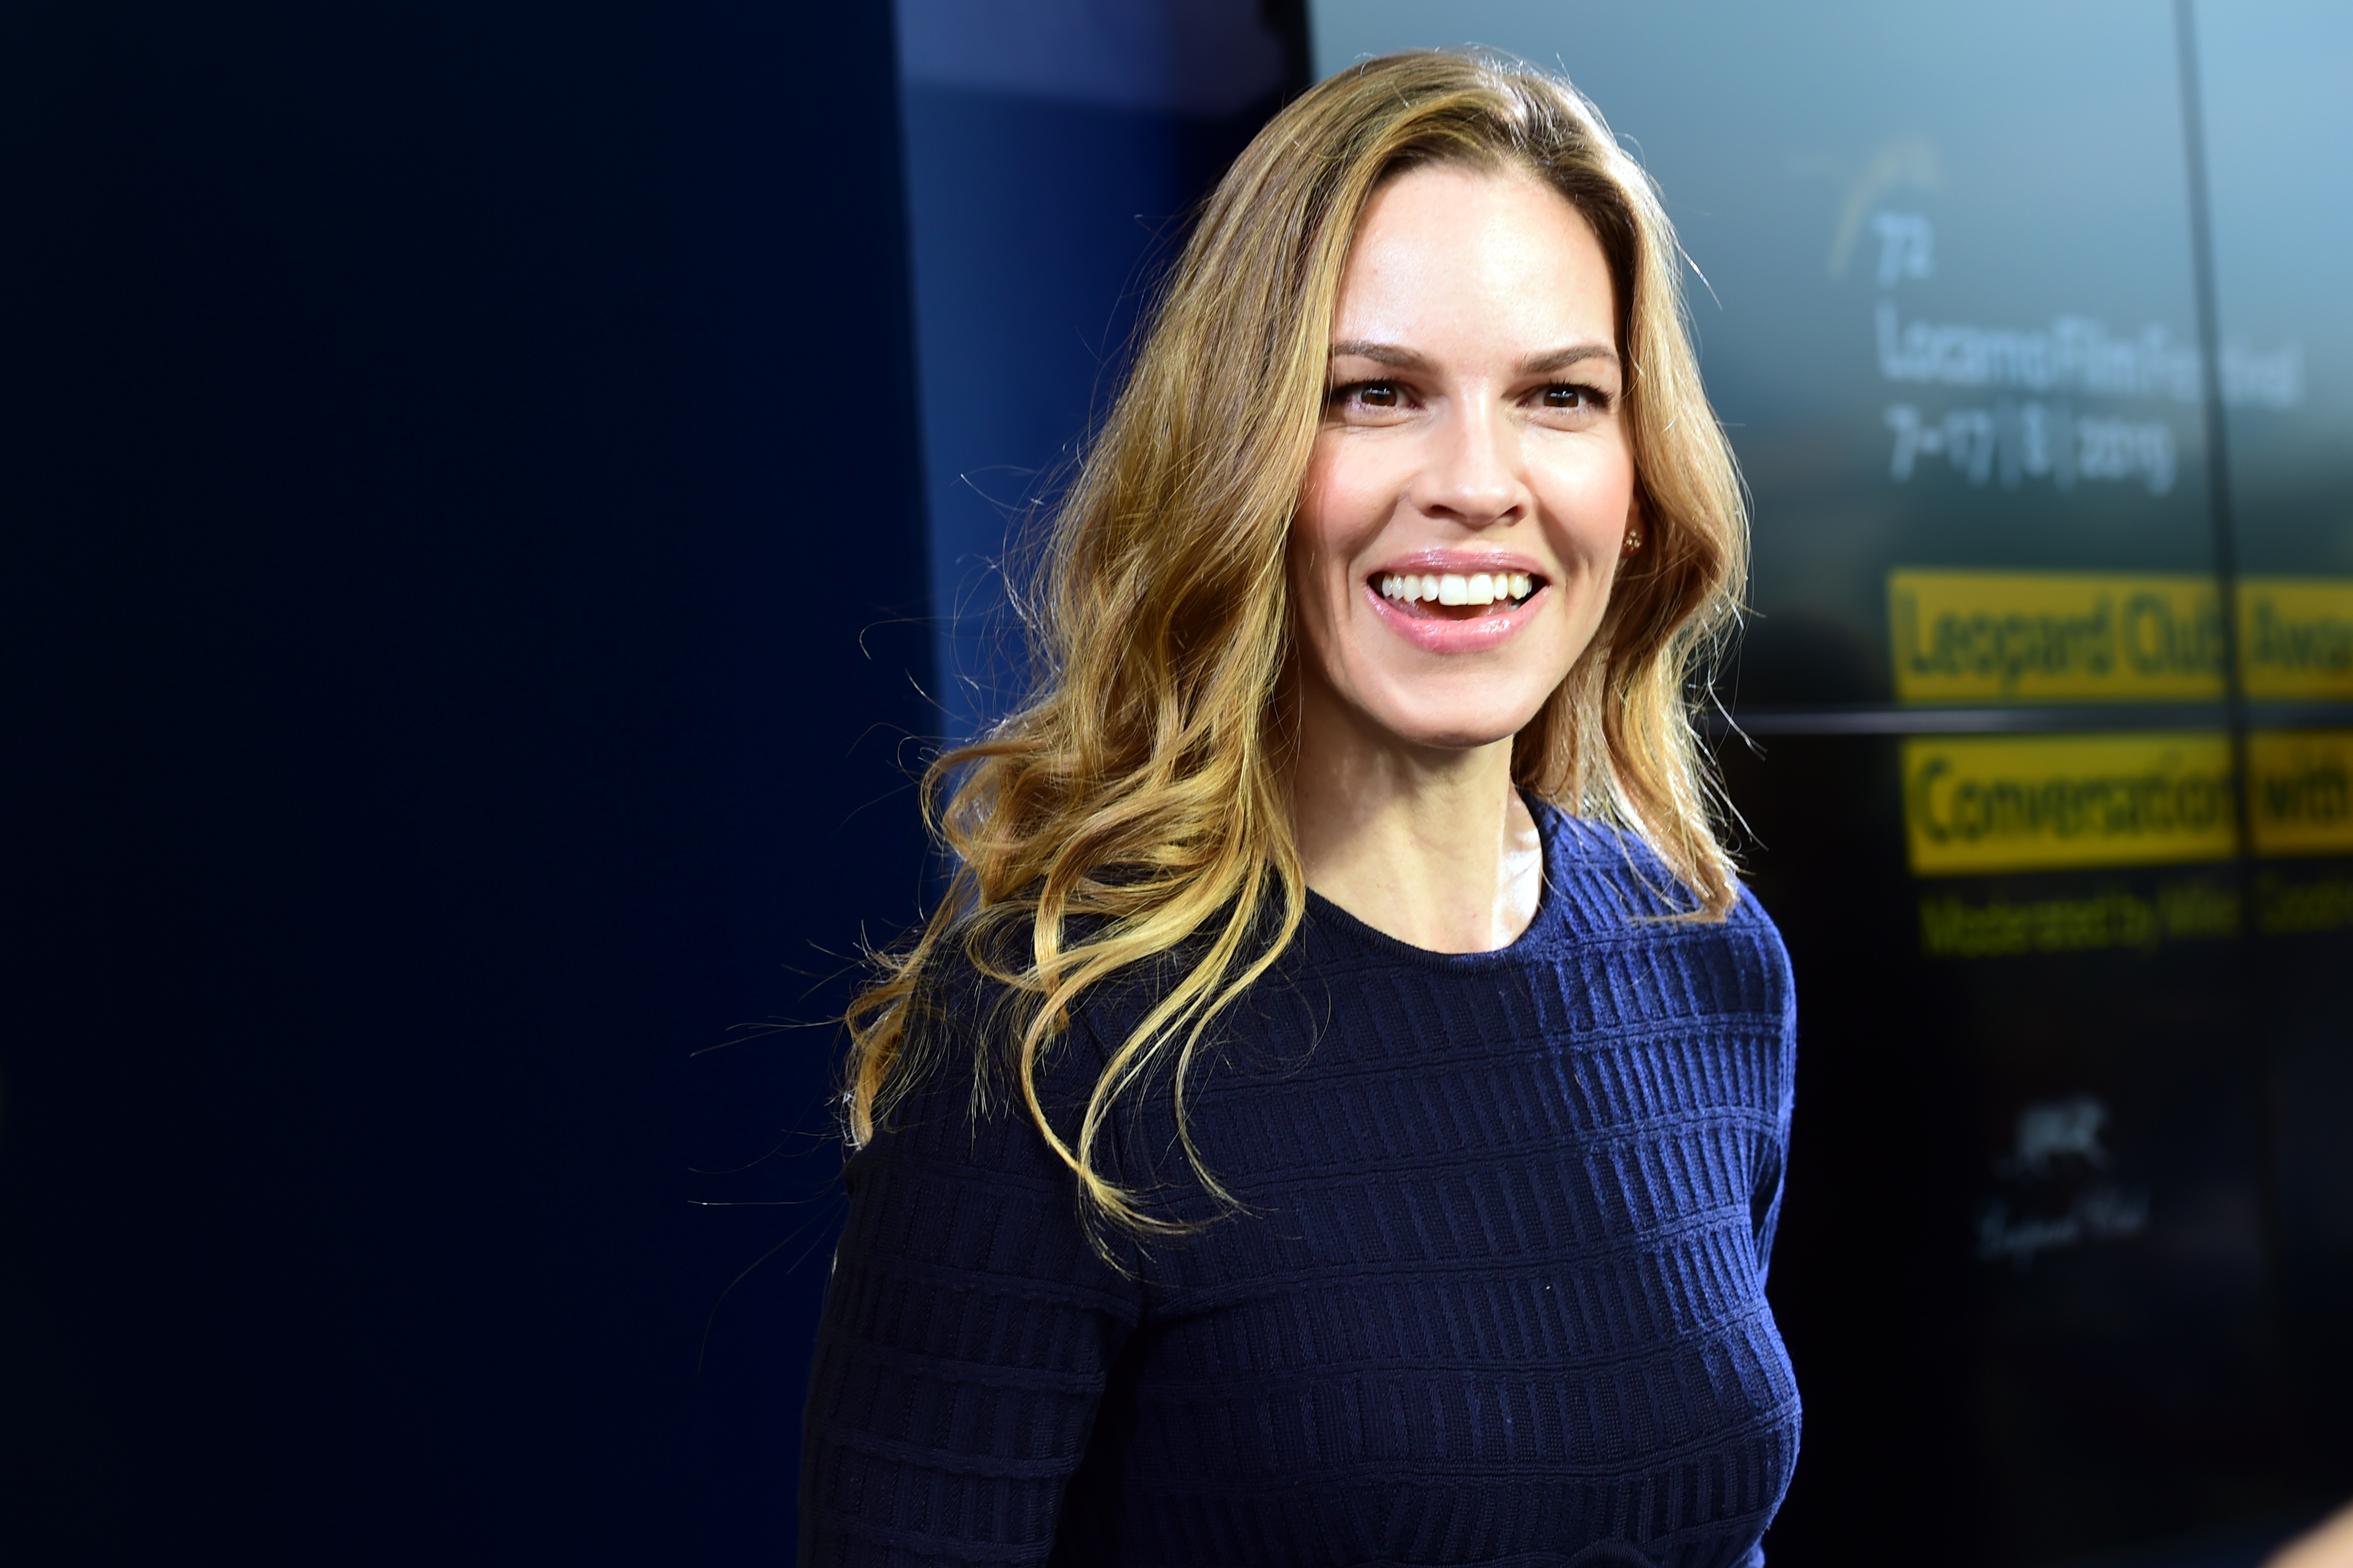 Hilary Swank at the 72nd Locarno Film Festival in 2019 | Source: Getty Images